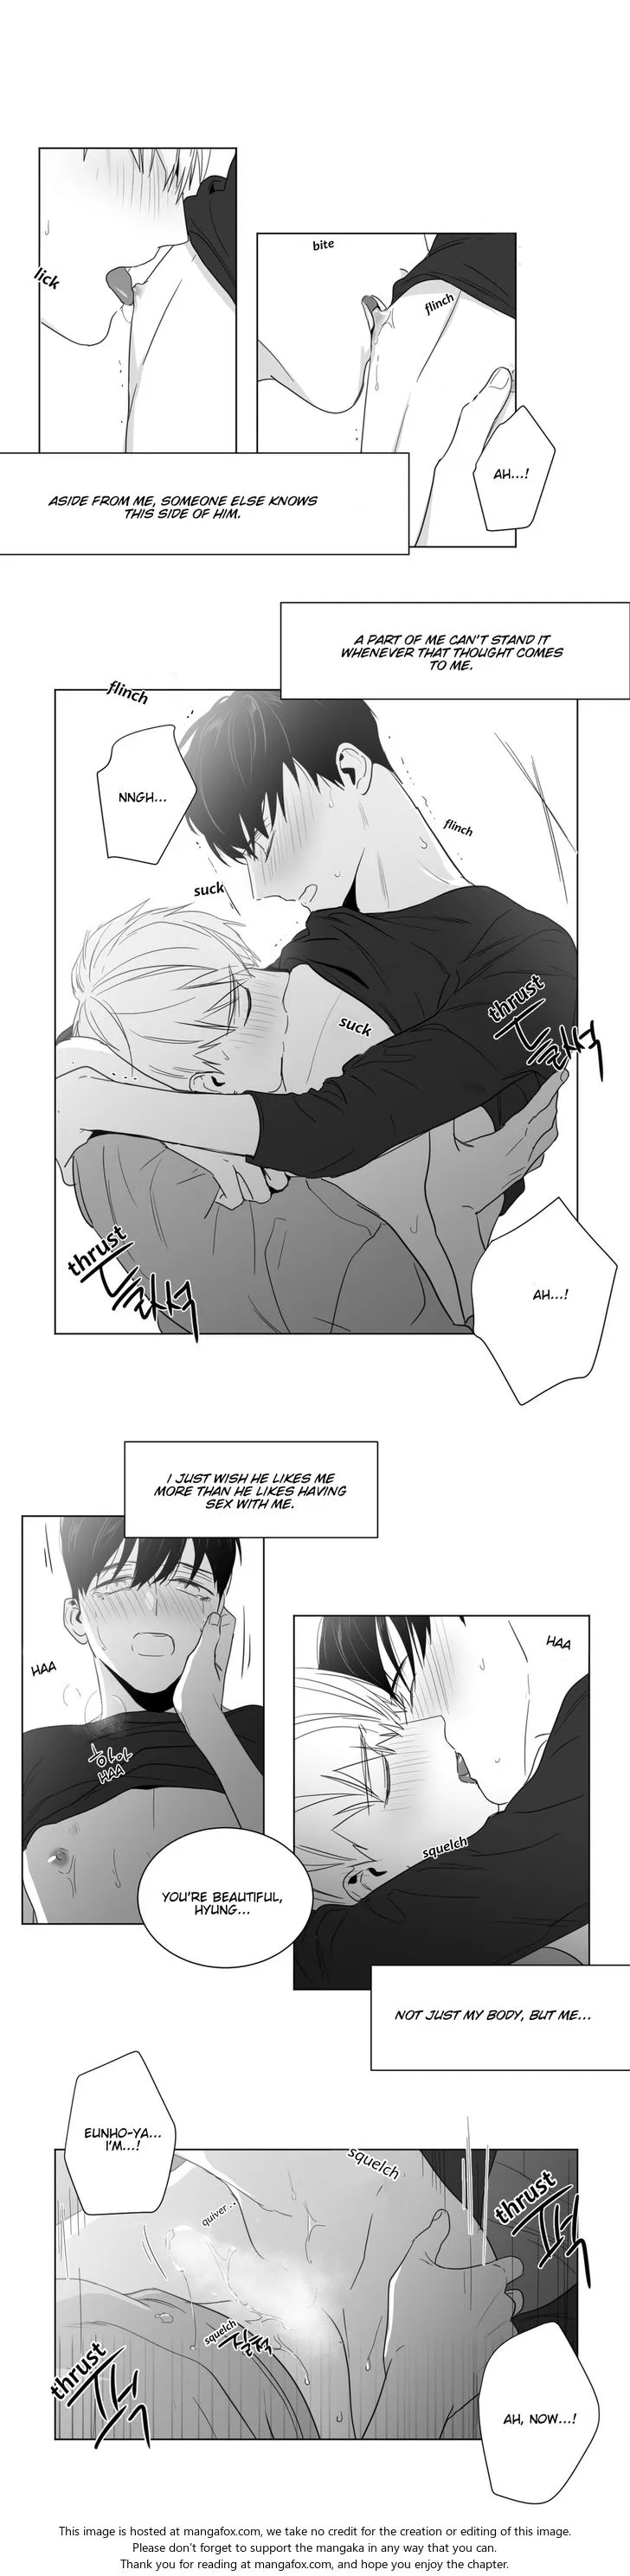 Lover Boy (Lezhin) Chapter 019 page 15